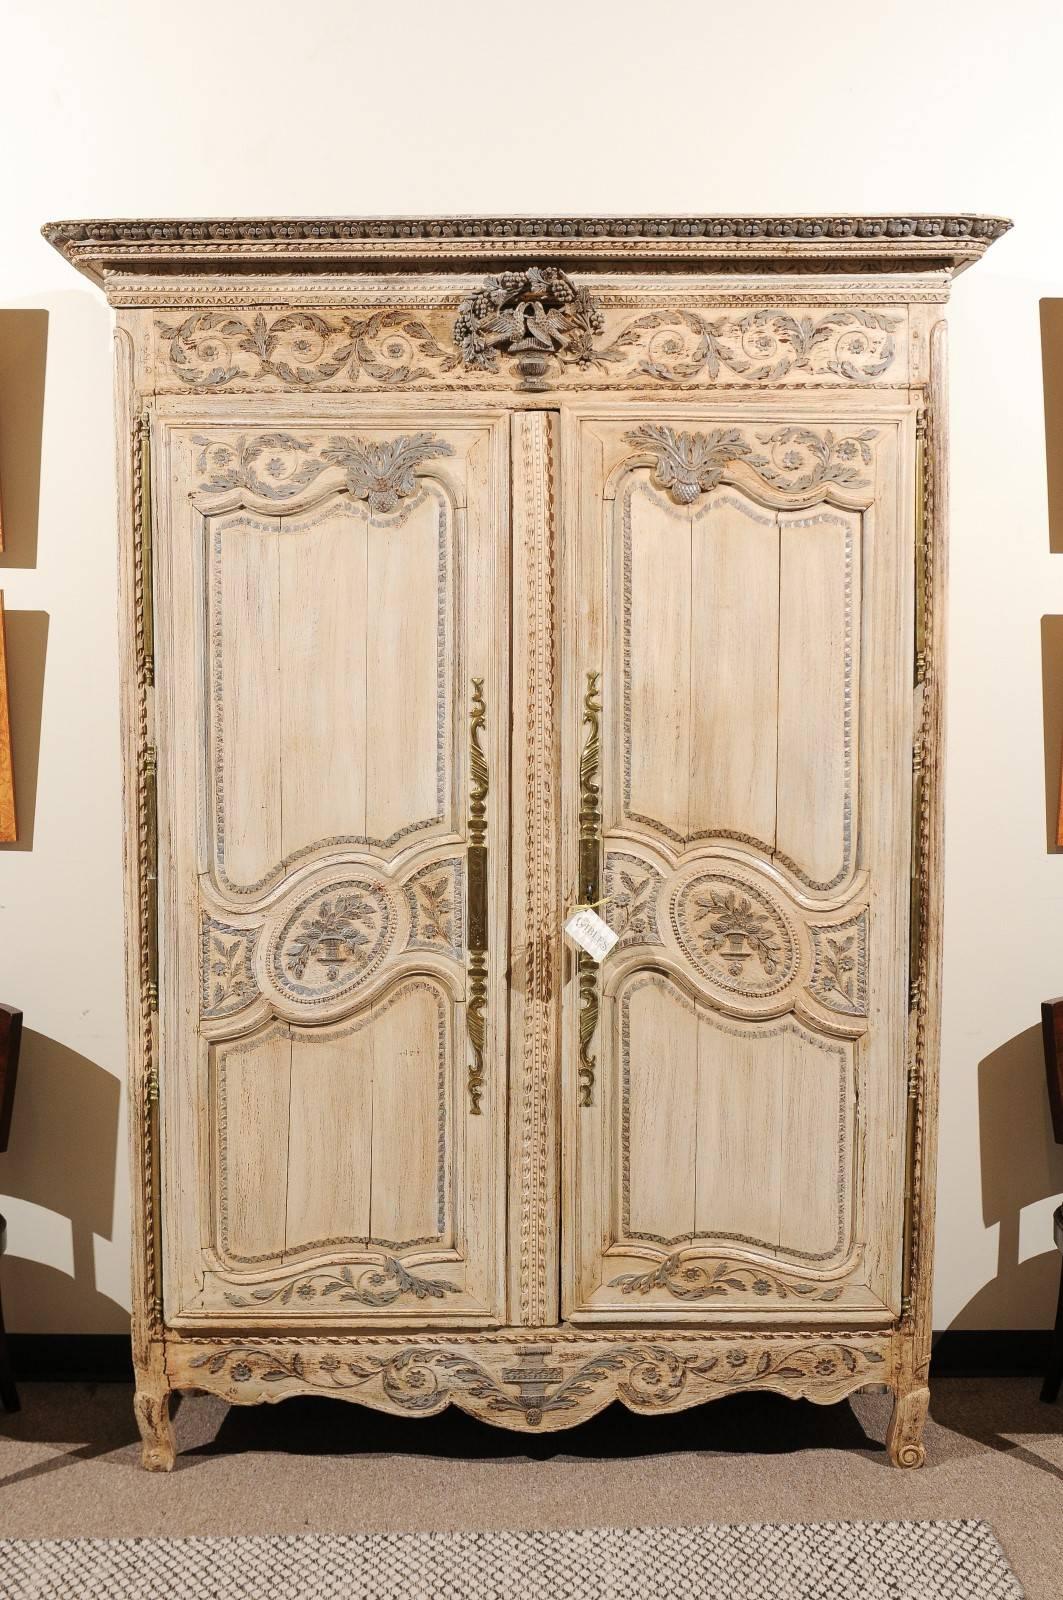 19th Century  French Painted Armoire, Circa 1820
The French had a lovely tradition of gifting their children with a 